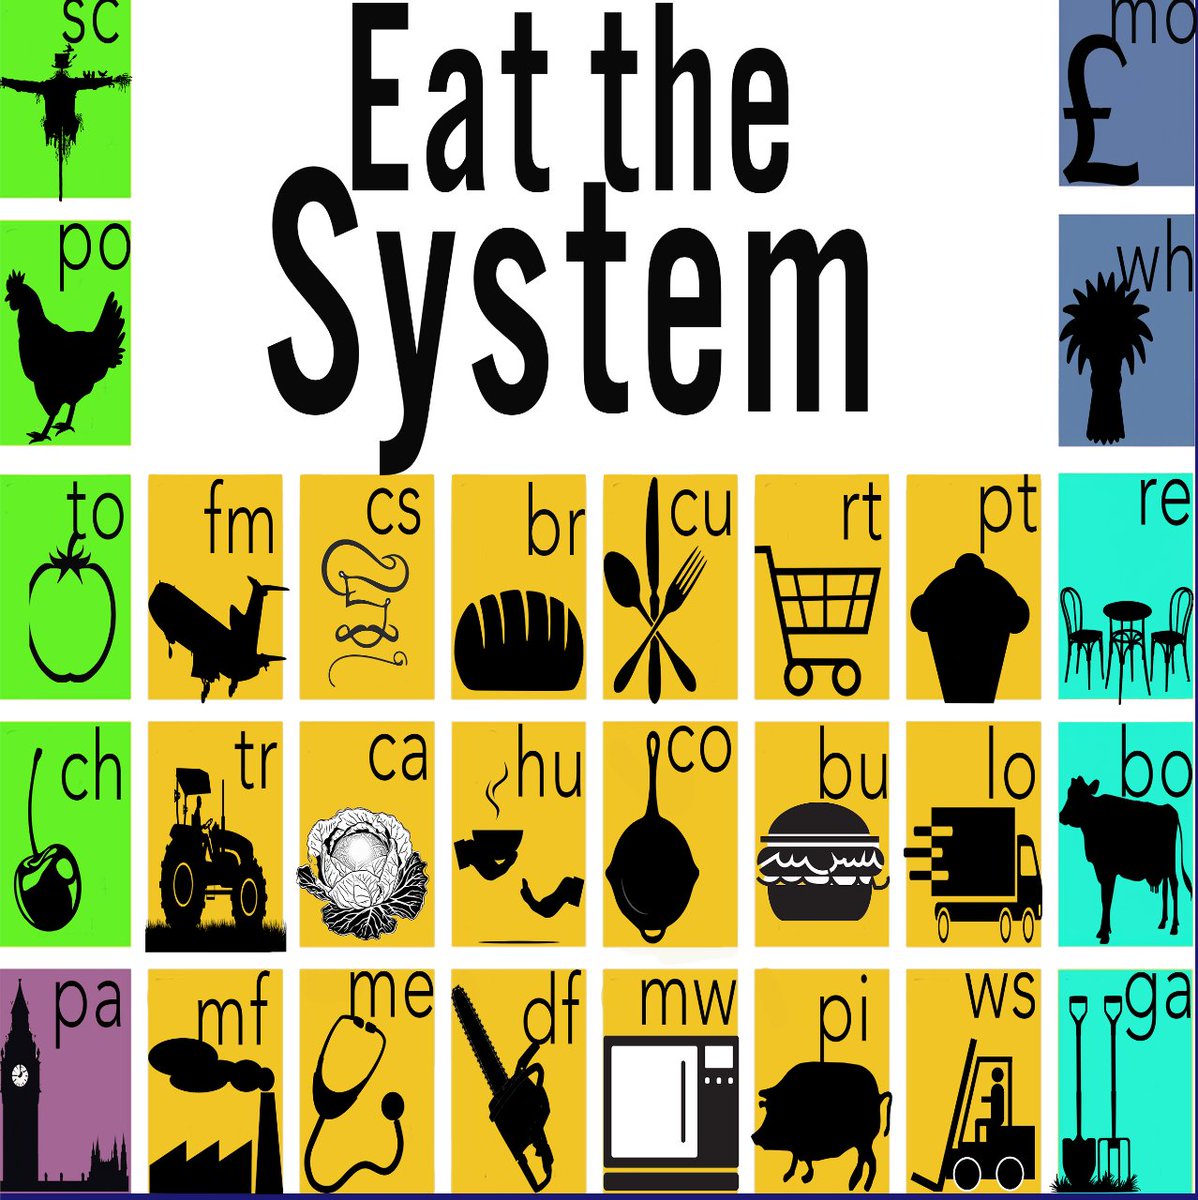 Our latest #EatTheSystem podcast is out now! This year @FairtradeUK celebrates it's 30th Anniversary. We caught up with @Ranavalona111 when she came over to @fairtradehull to talk about both Fairtrade and her connected projects. Listen: shows.acast.com/65a7f0f83e2c0d…? @AllsFairTours